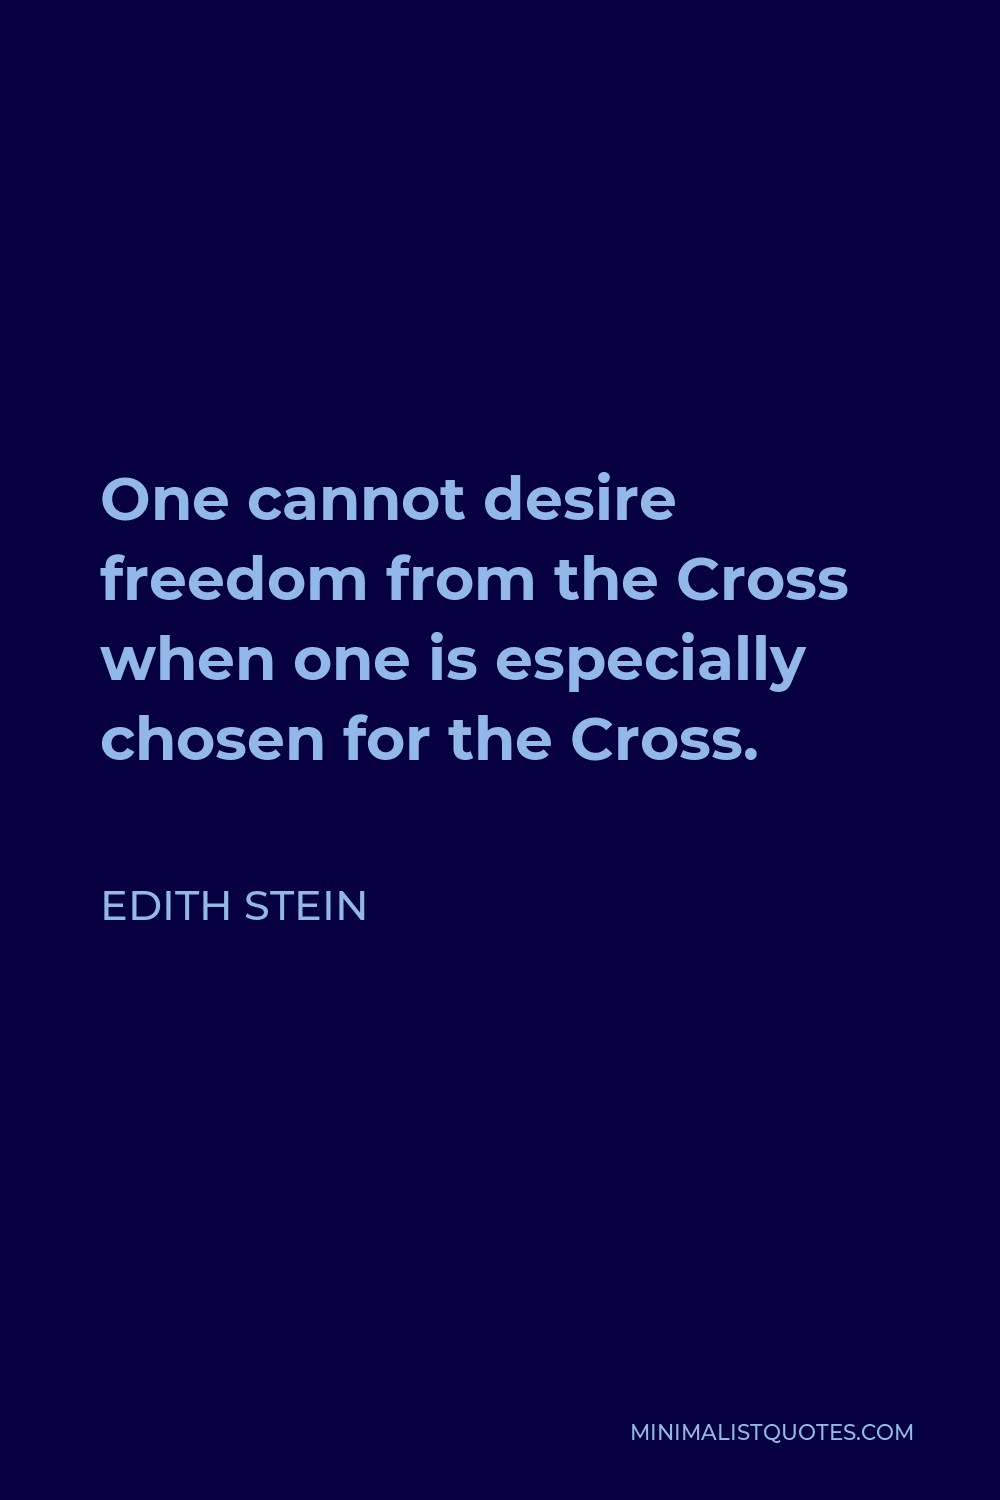 Edith Stein Quote - One cannot desire freedom from the Cross when one is especially chosen for the Cross.